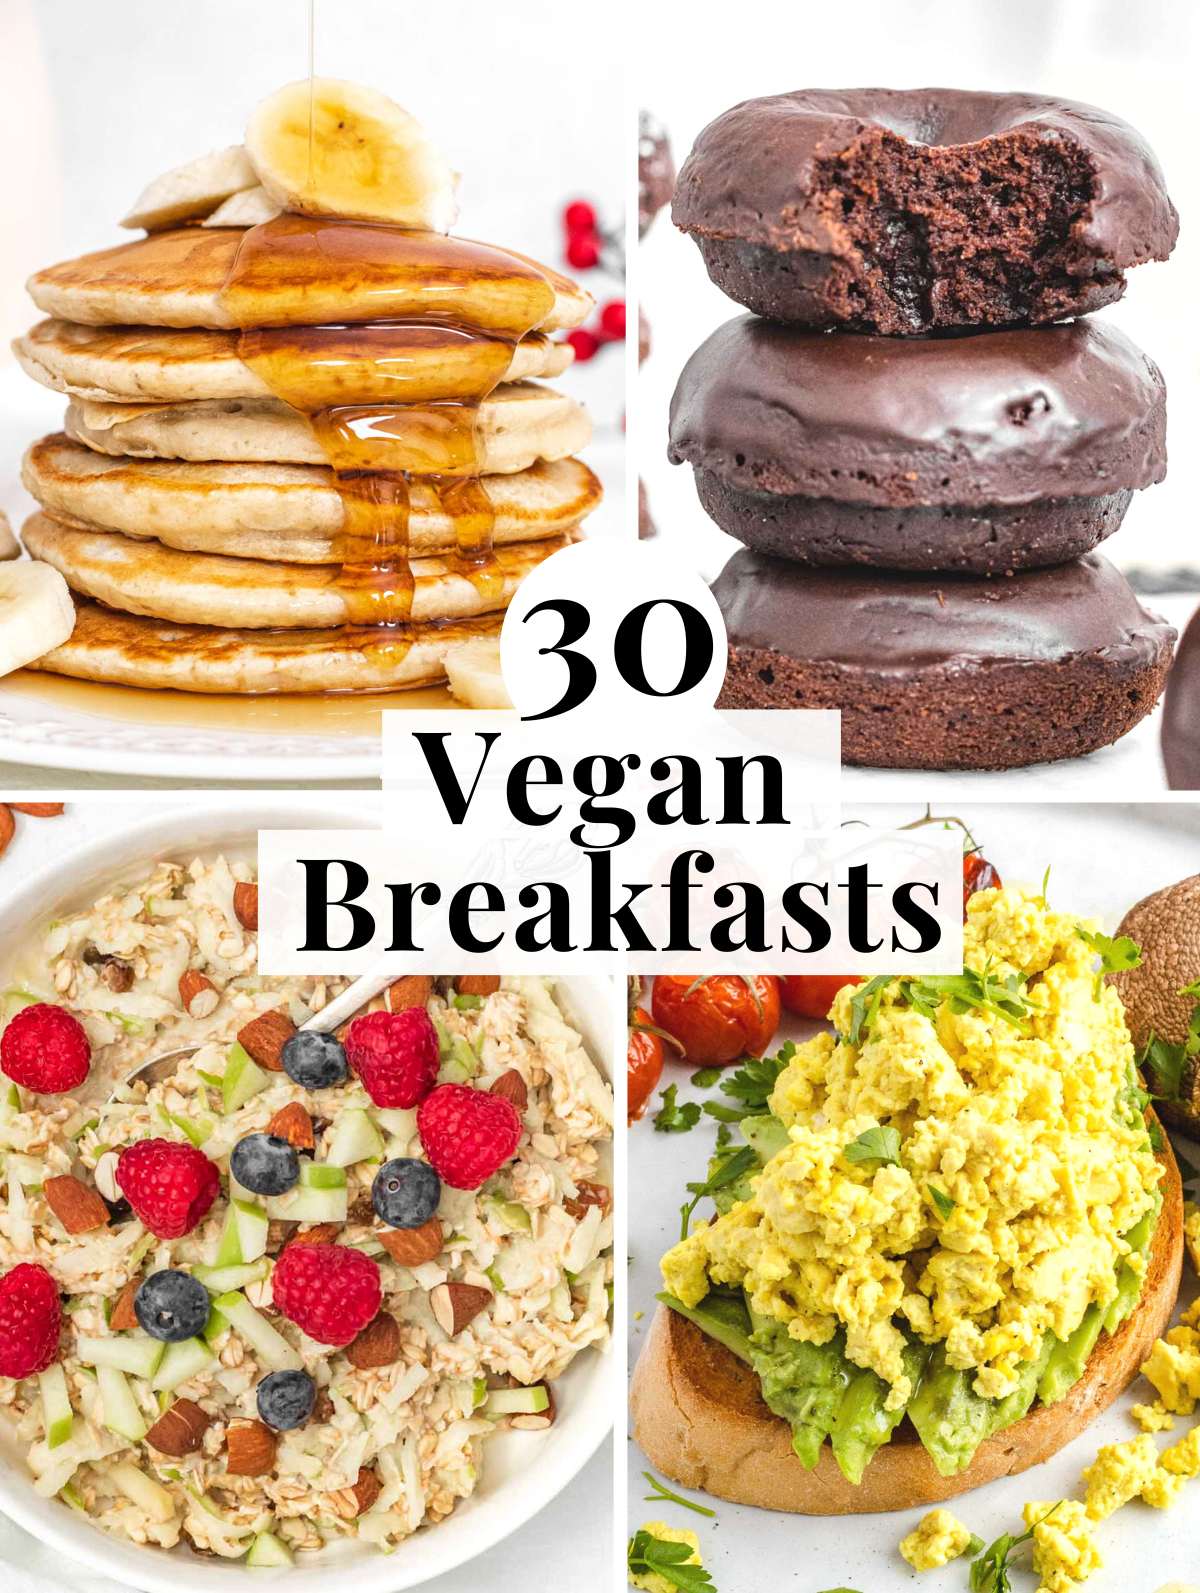 Vegan Breakfast Ideas with sweet and savory recipes